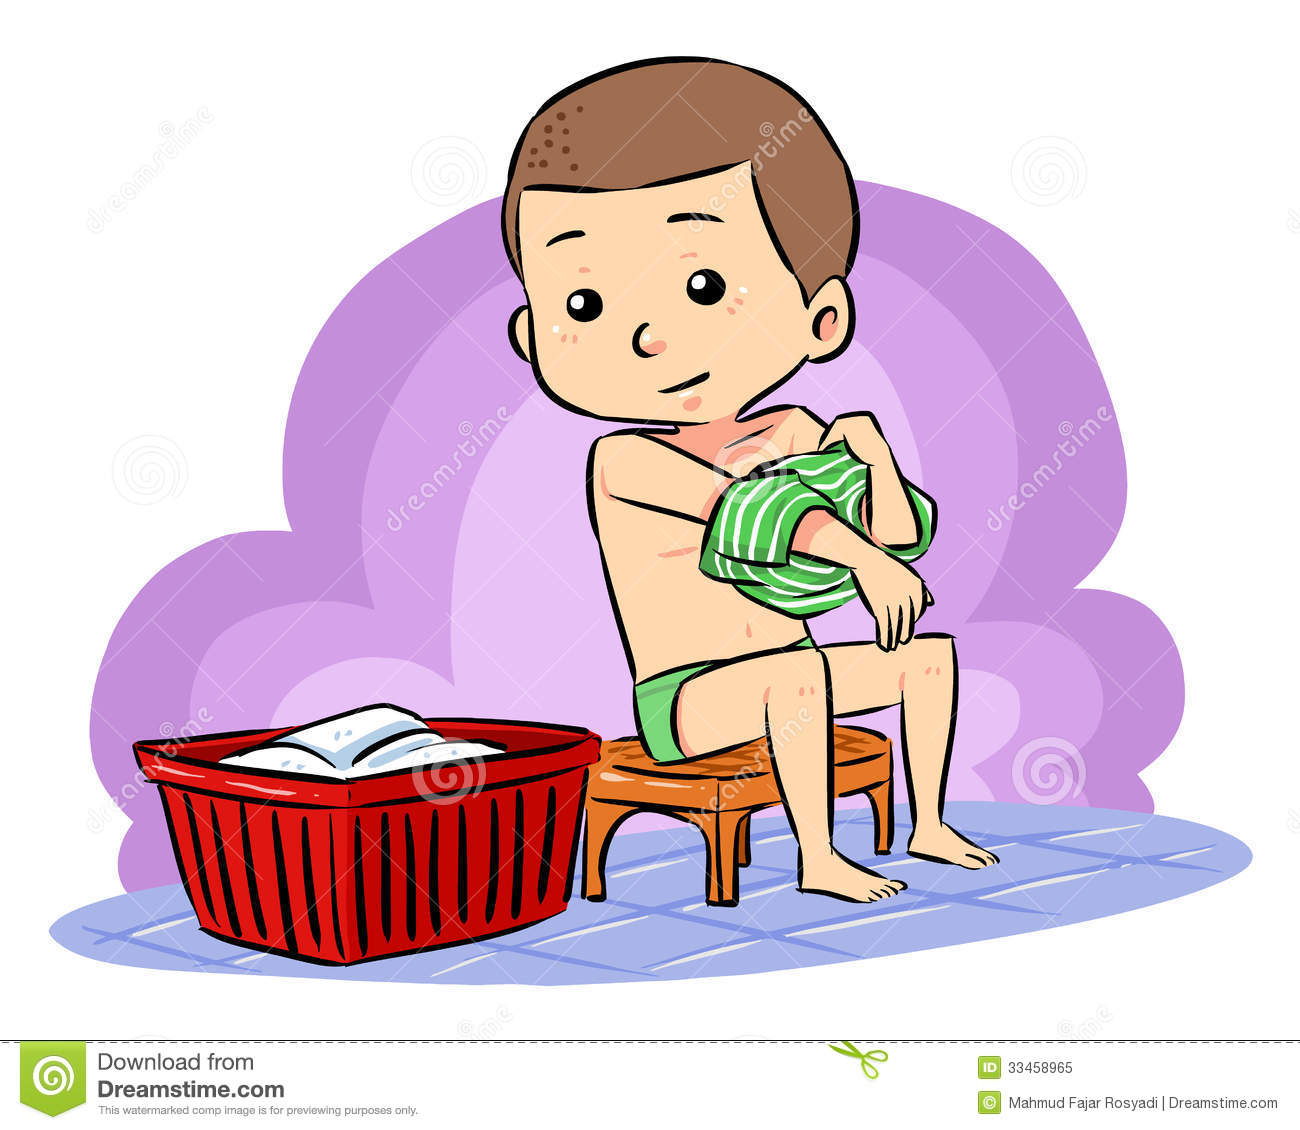 Putting On Clothes Clipart To Put On Clothes Clipart